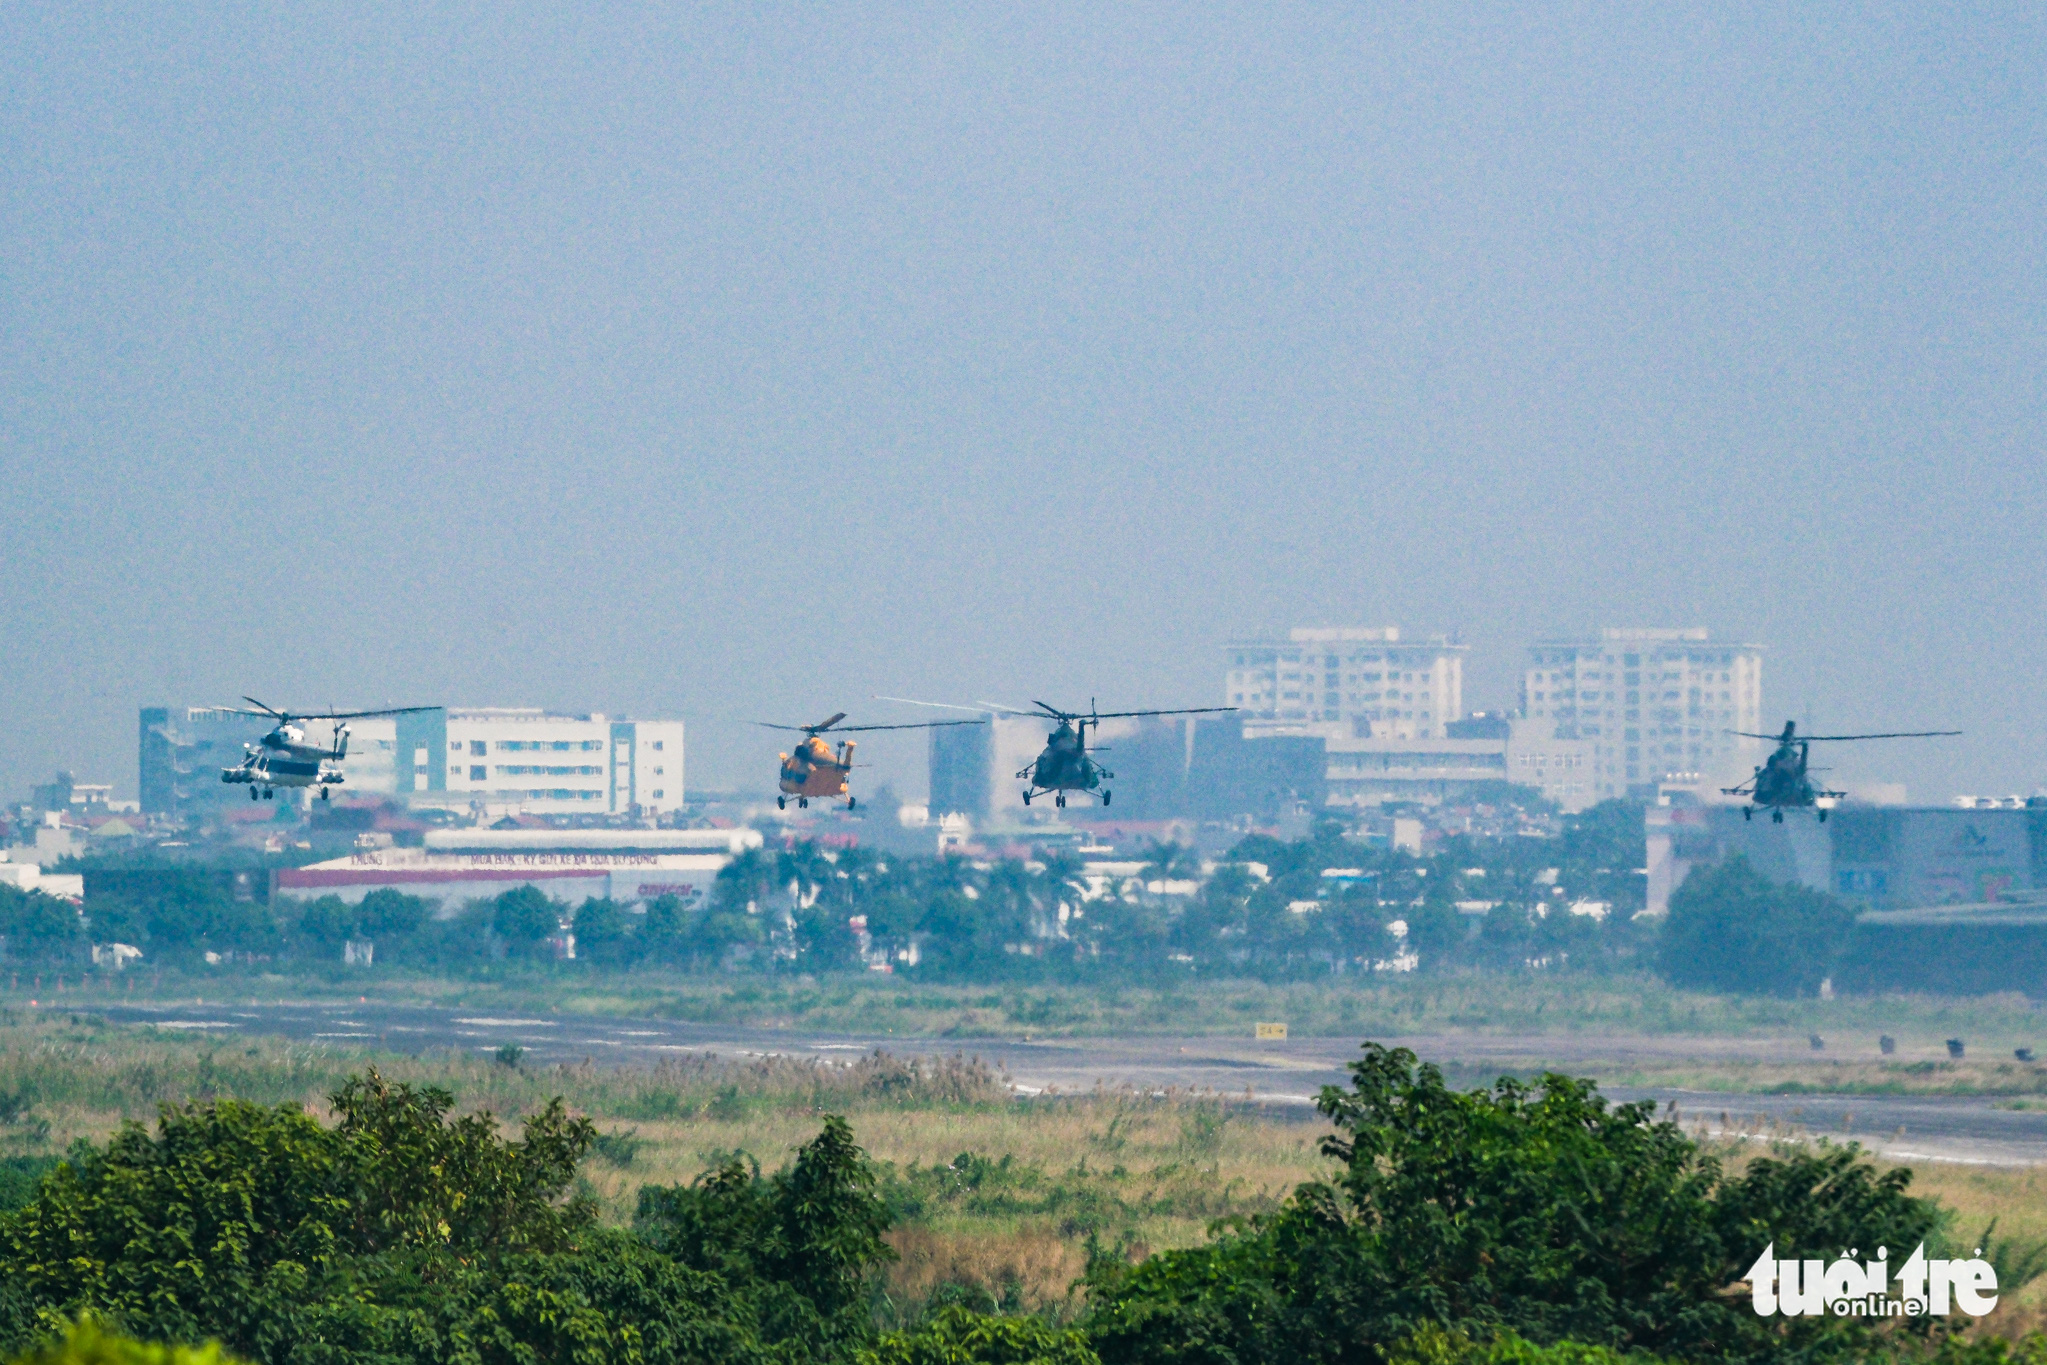 Four Mi helicopters take off from Gia Lam Airport in Long Bien District, Hanoi as part of flight drills to prepare for the Vietnam International Defense Expo 2022, November 3, 2022. Photo: Nam Tran / Tuoi Tre